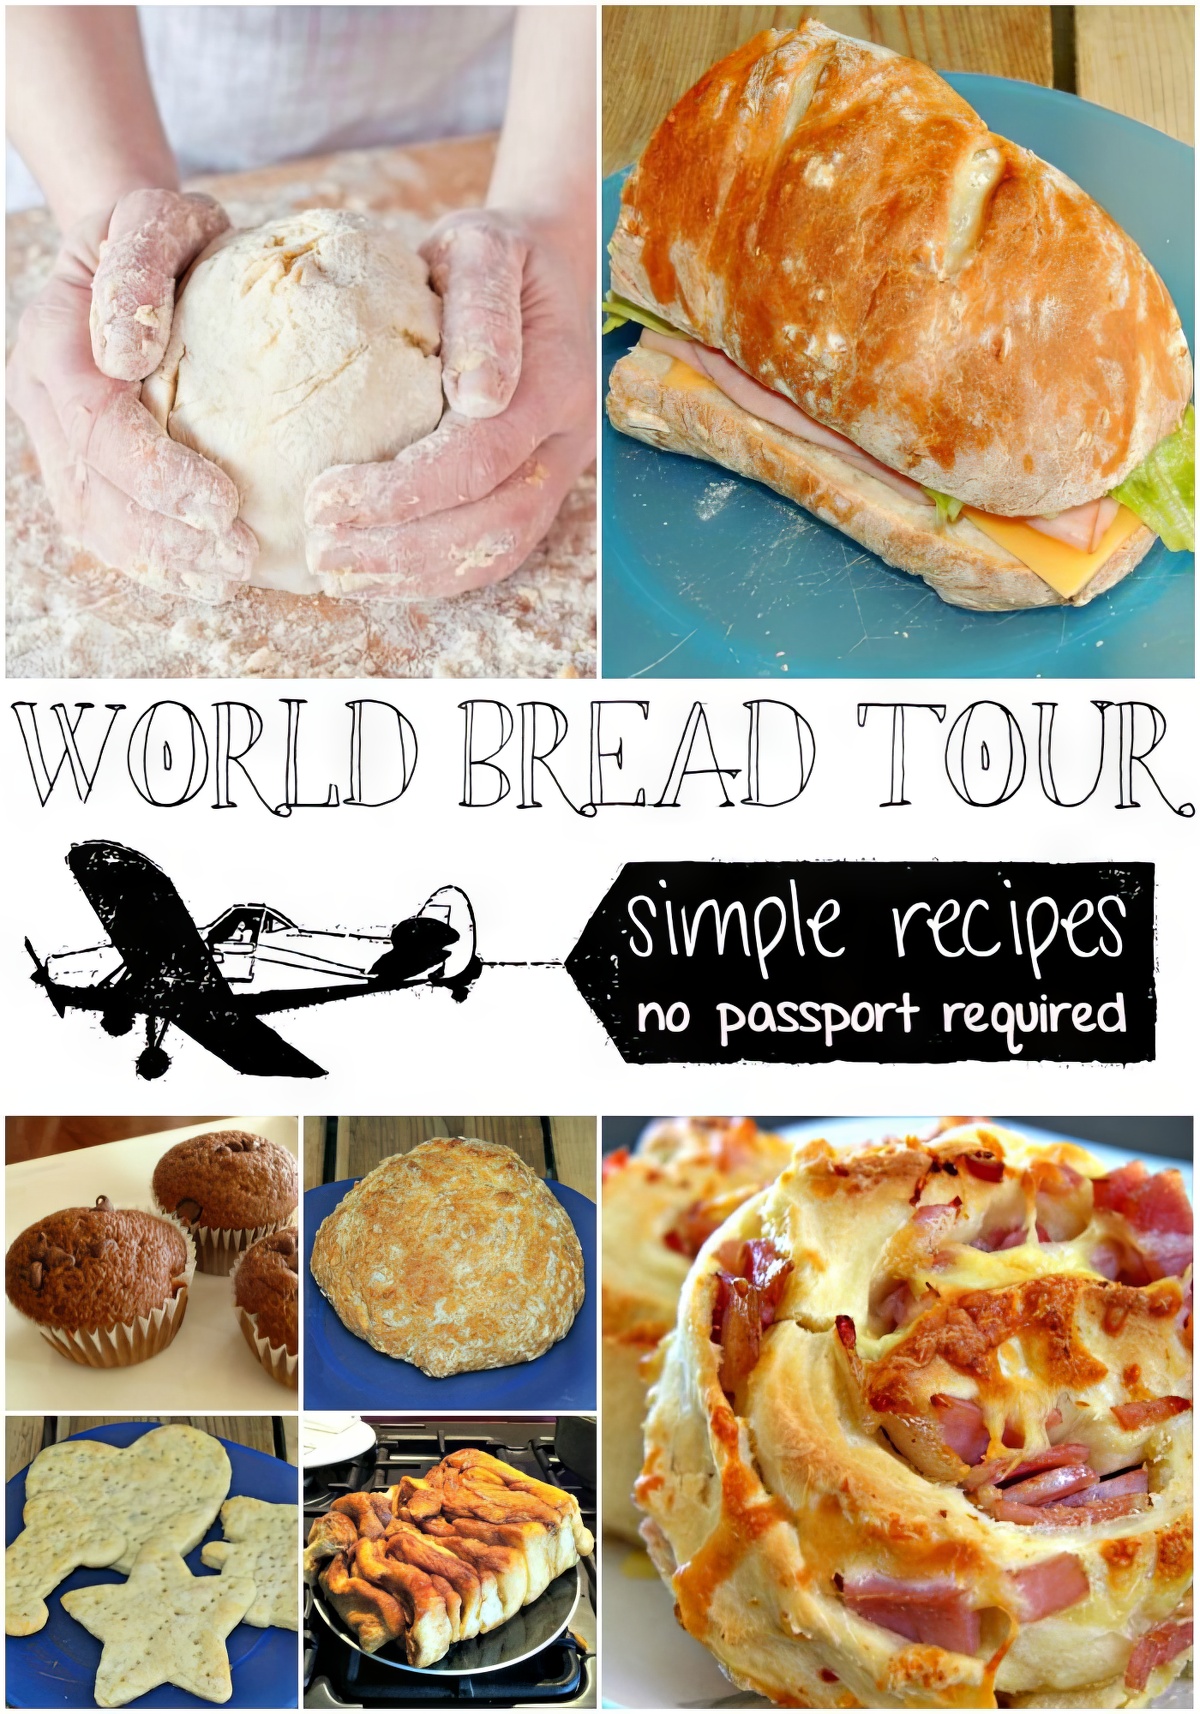 Go On a World Bread Tour with these easy and yummy different bread recipes kids will love!